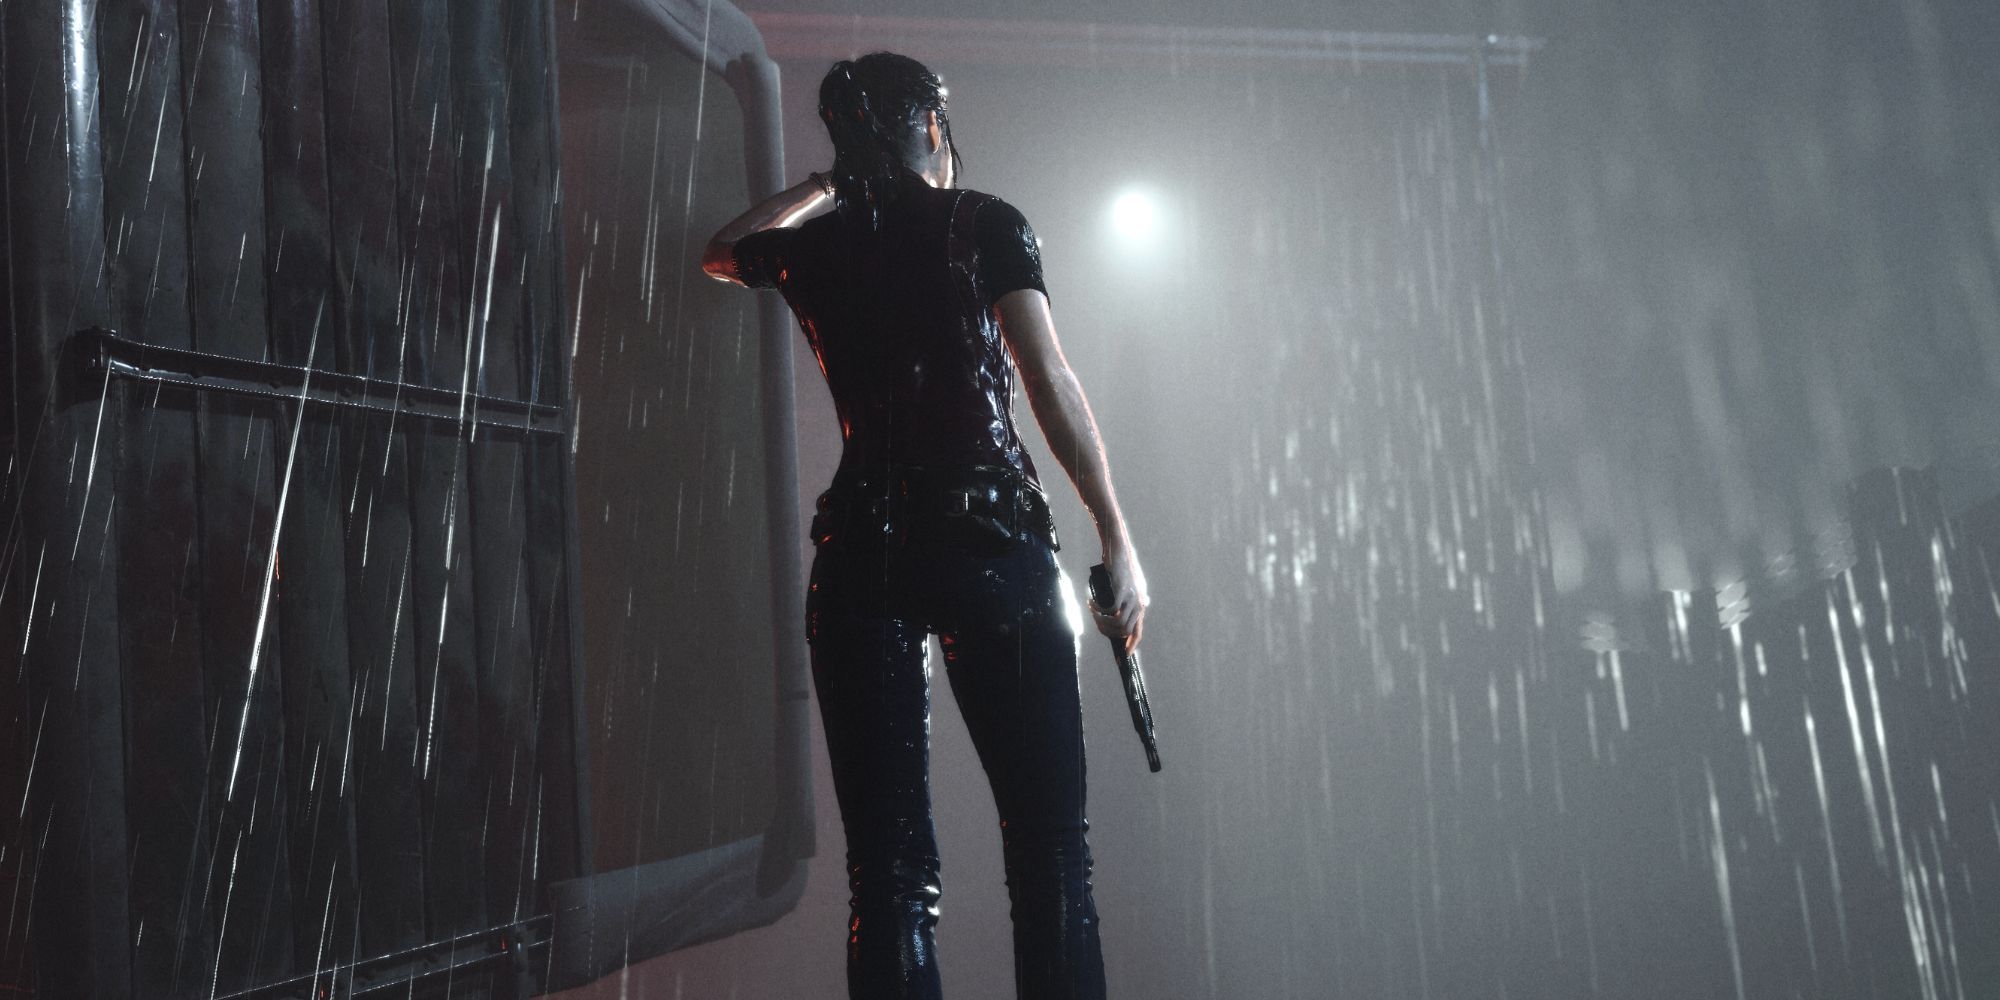 Resident Evil Code Veronica' Is Finally Getting The Remake Treatment